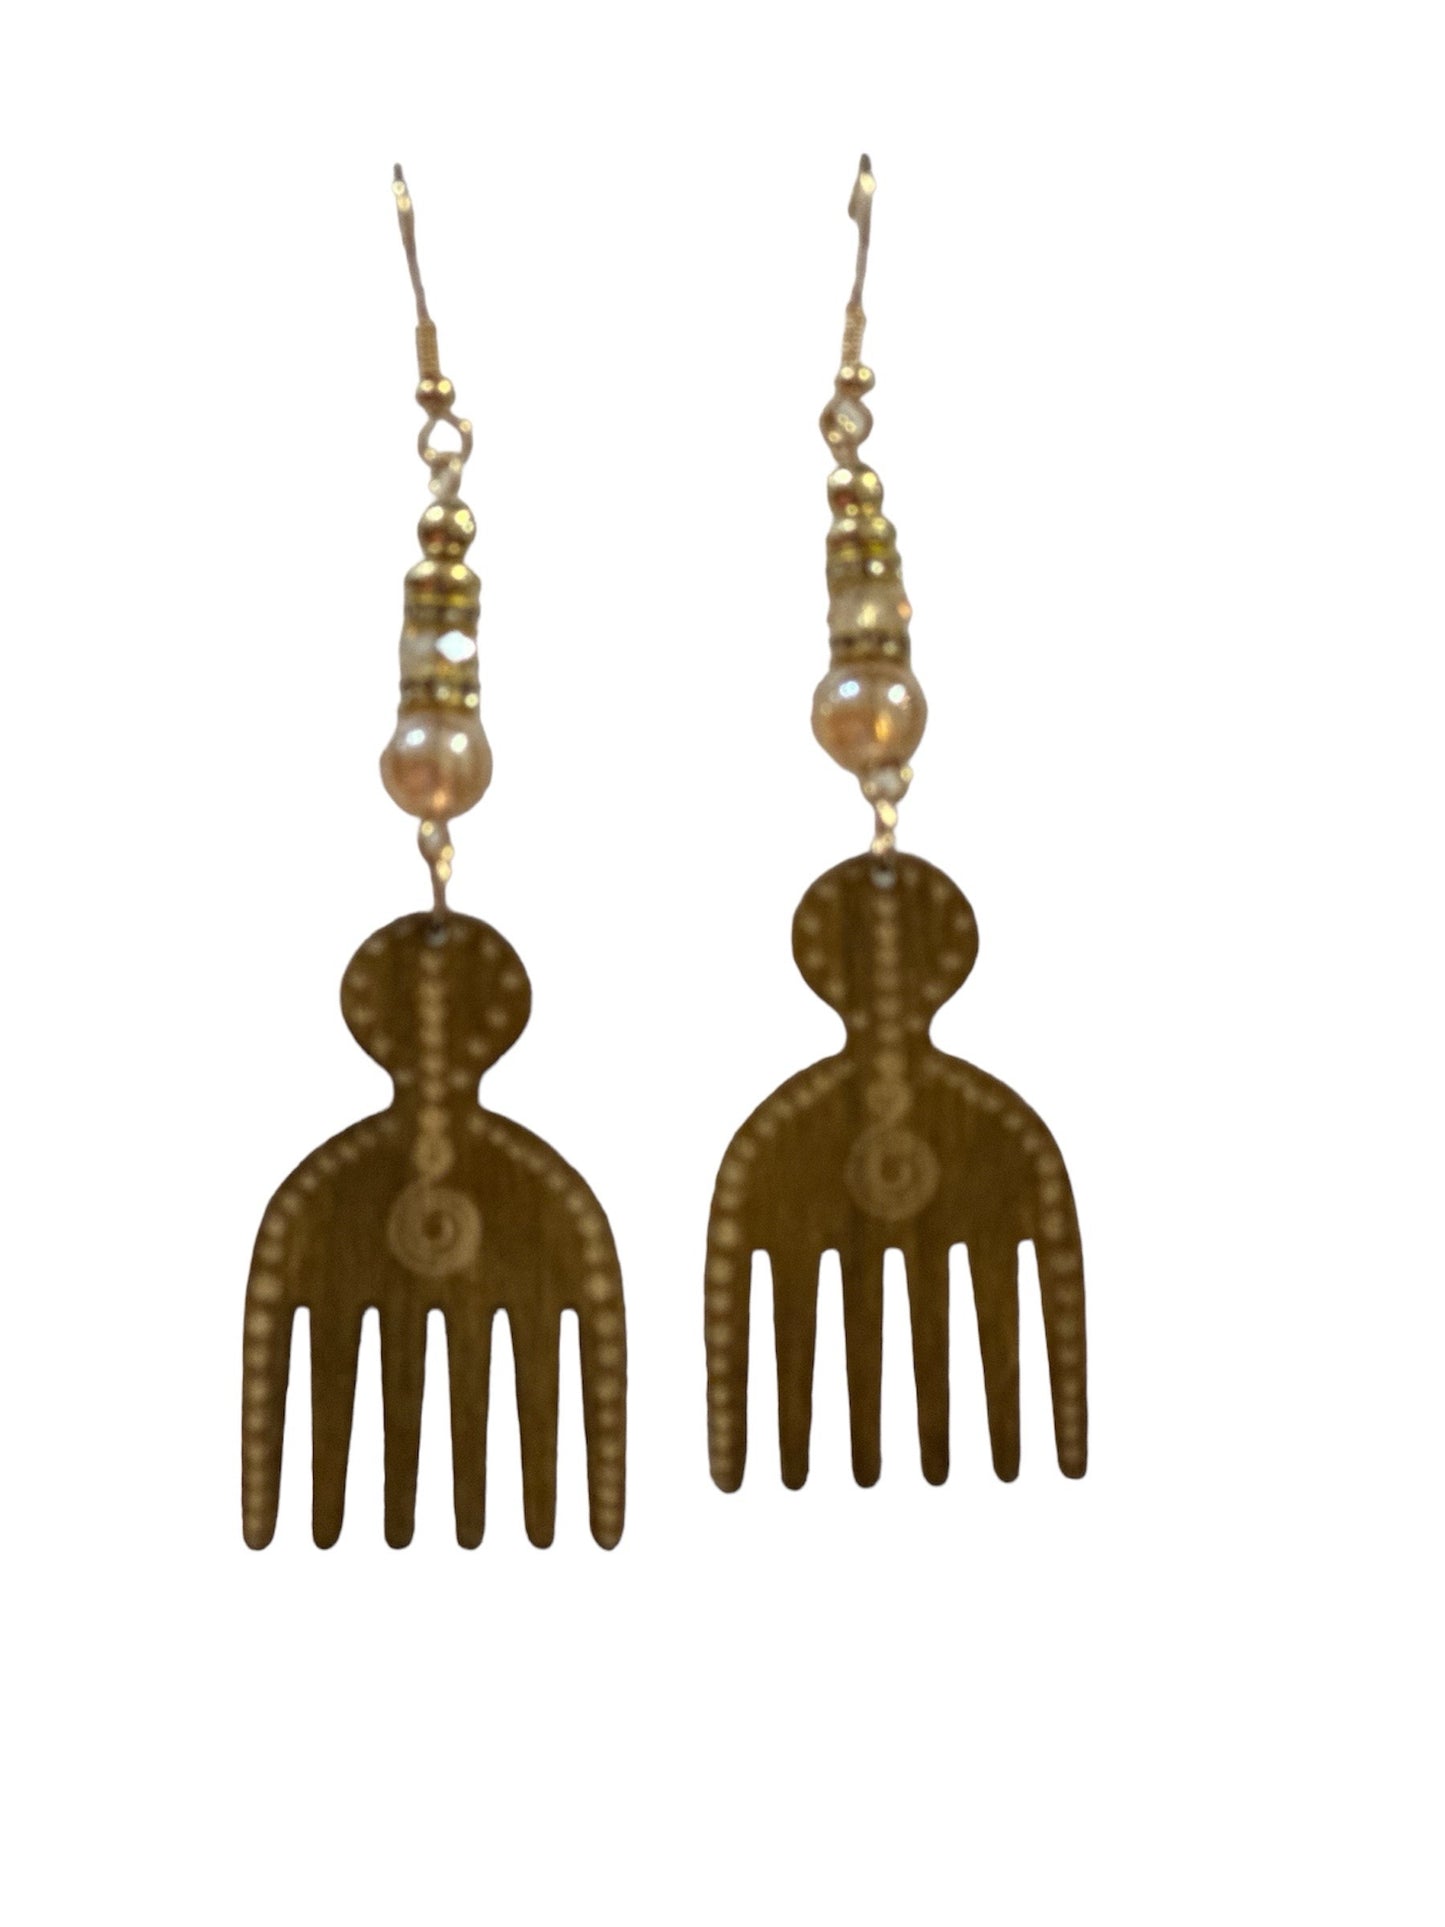 Wash color wooden hair pik comb earring